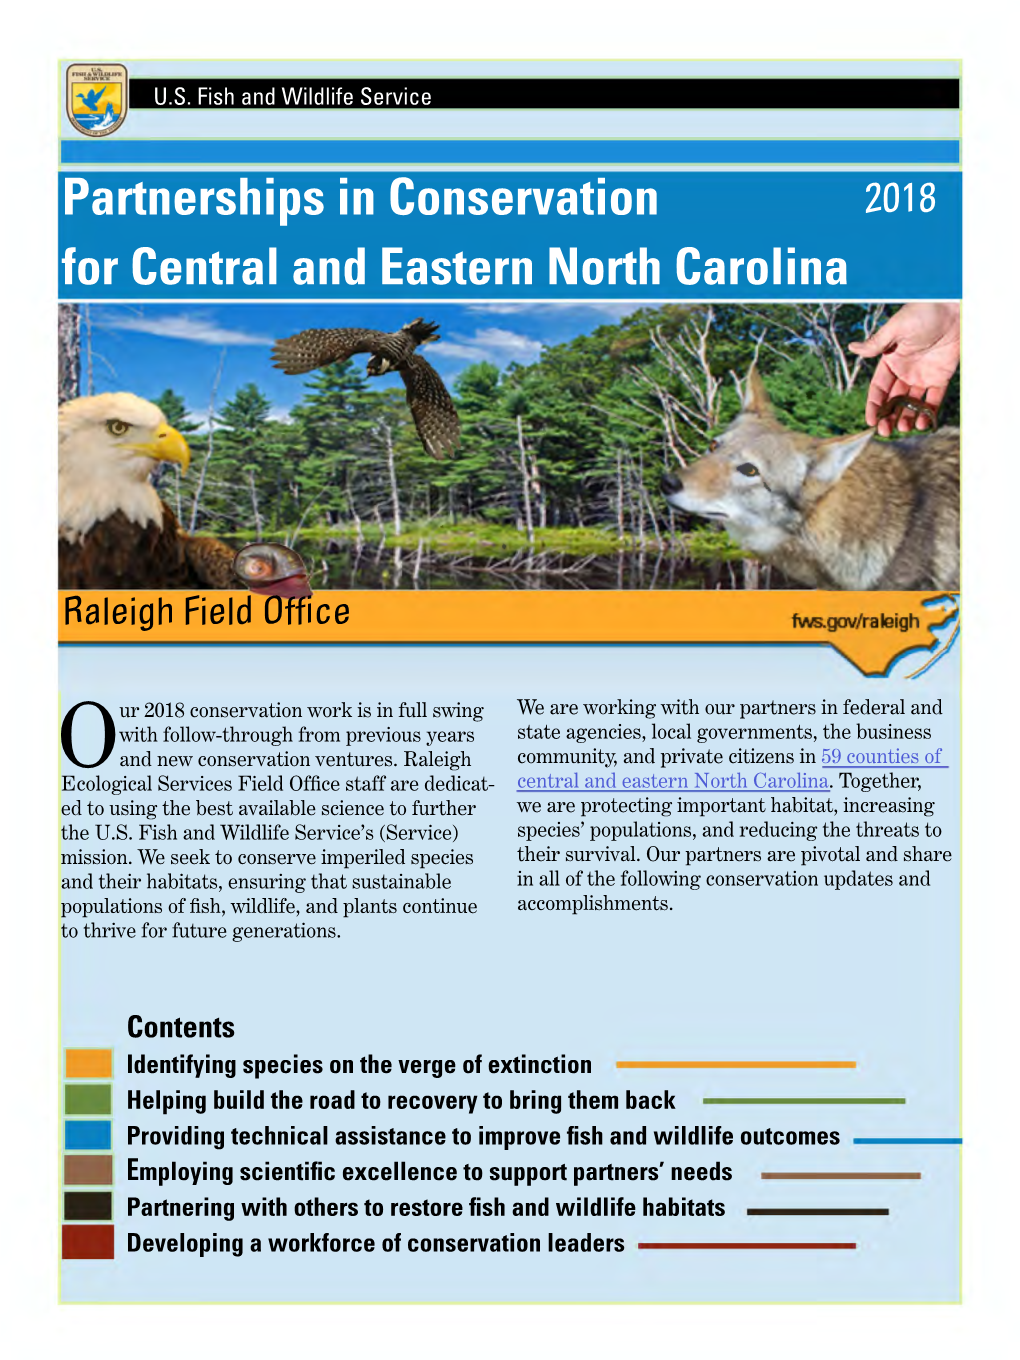 Partnerships in Conservation for Central and Eastern North Carolina